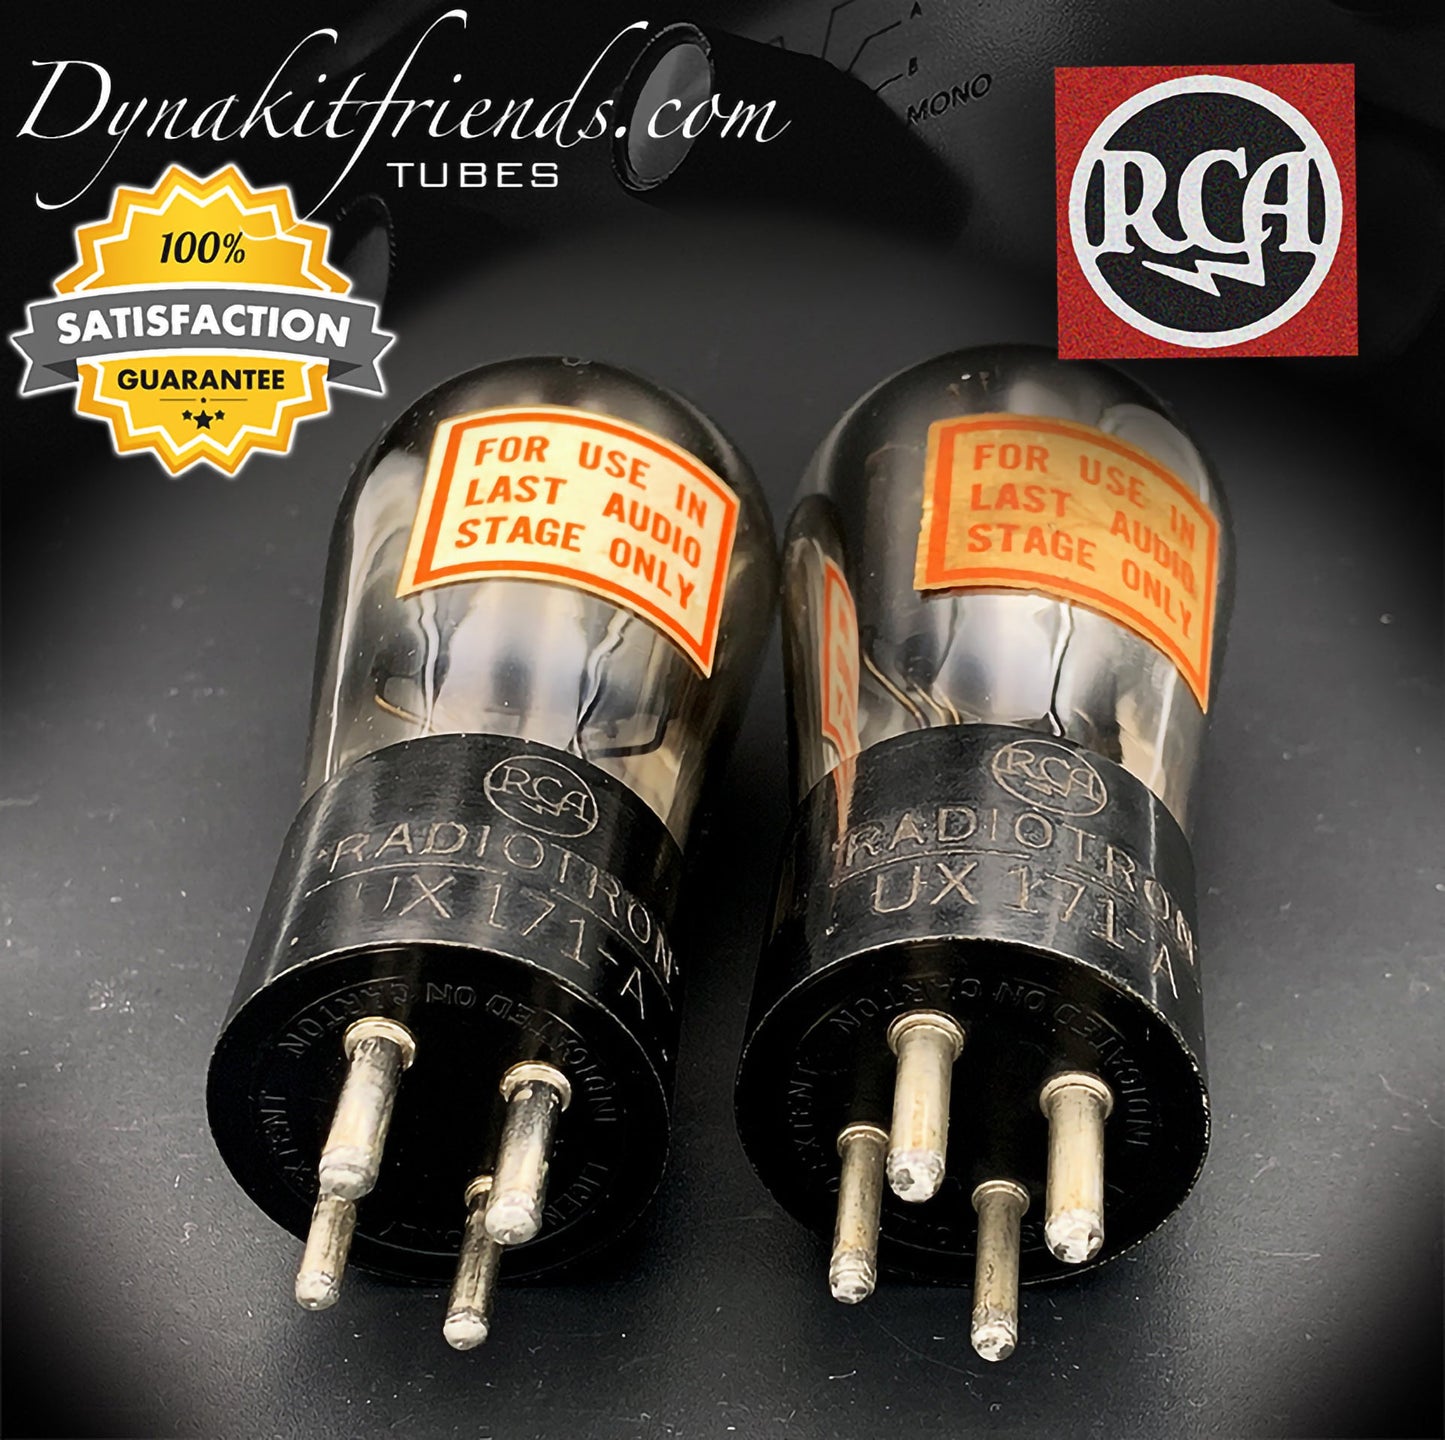 UX171A ( 71A ) RCA NOS Globe Power Triode Matched Pair Tubes Made In USA 1928